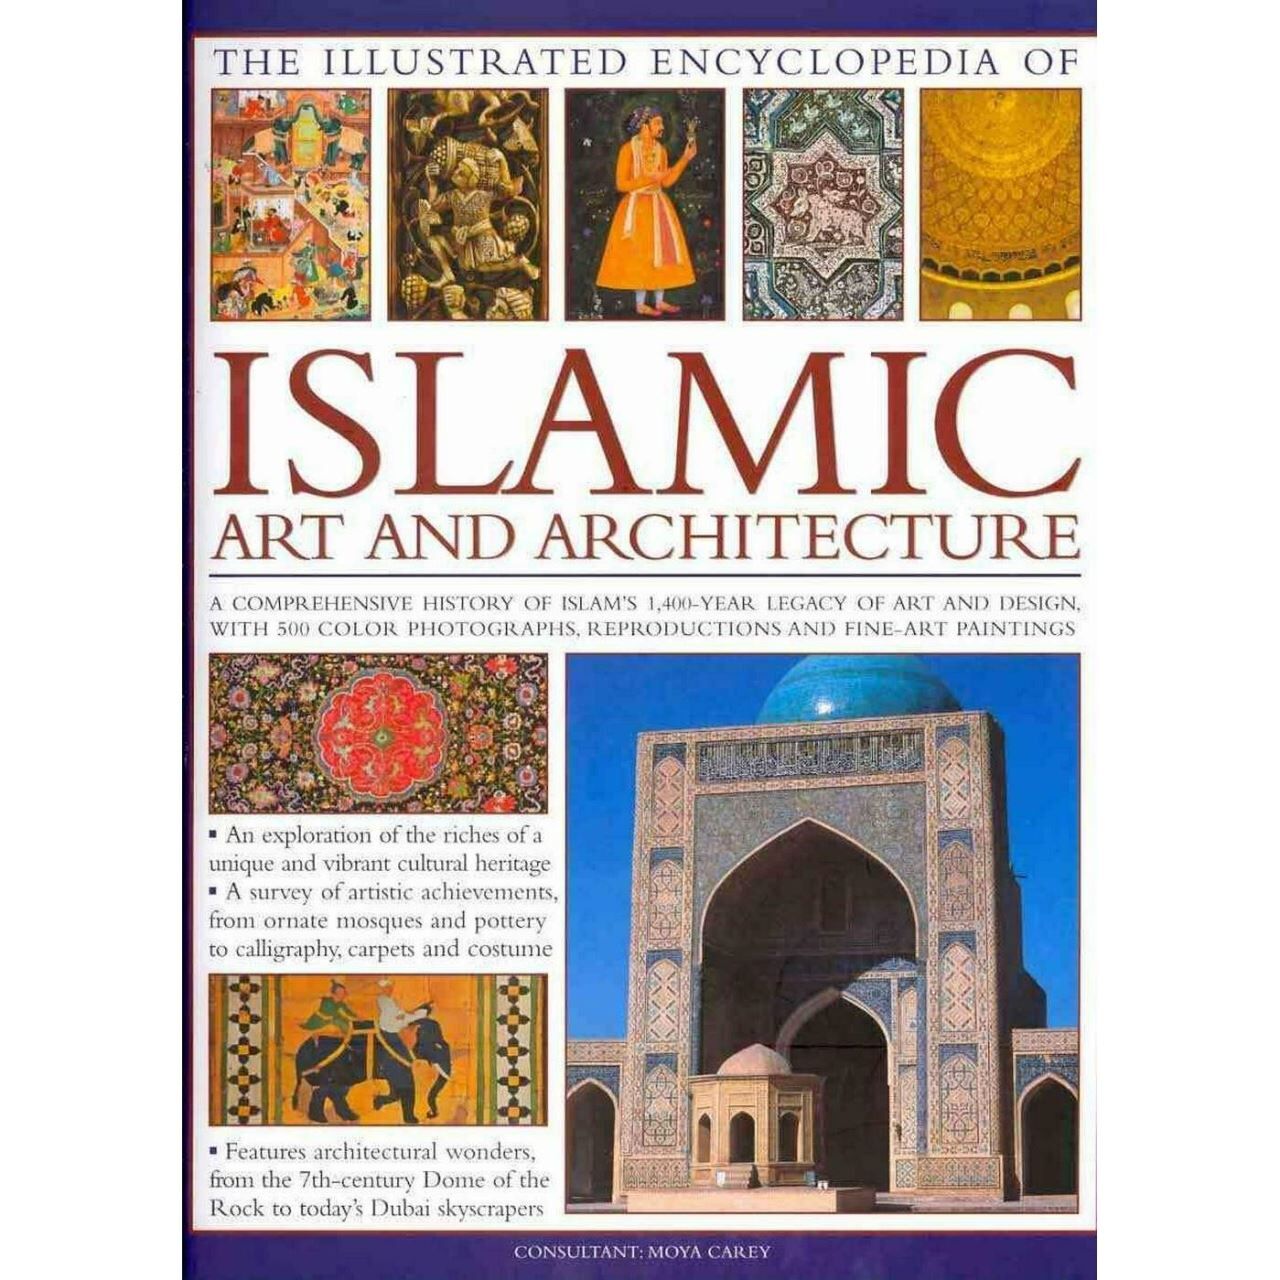 AA Illustrated Encyclopedia of Islamic Art and Architecture